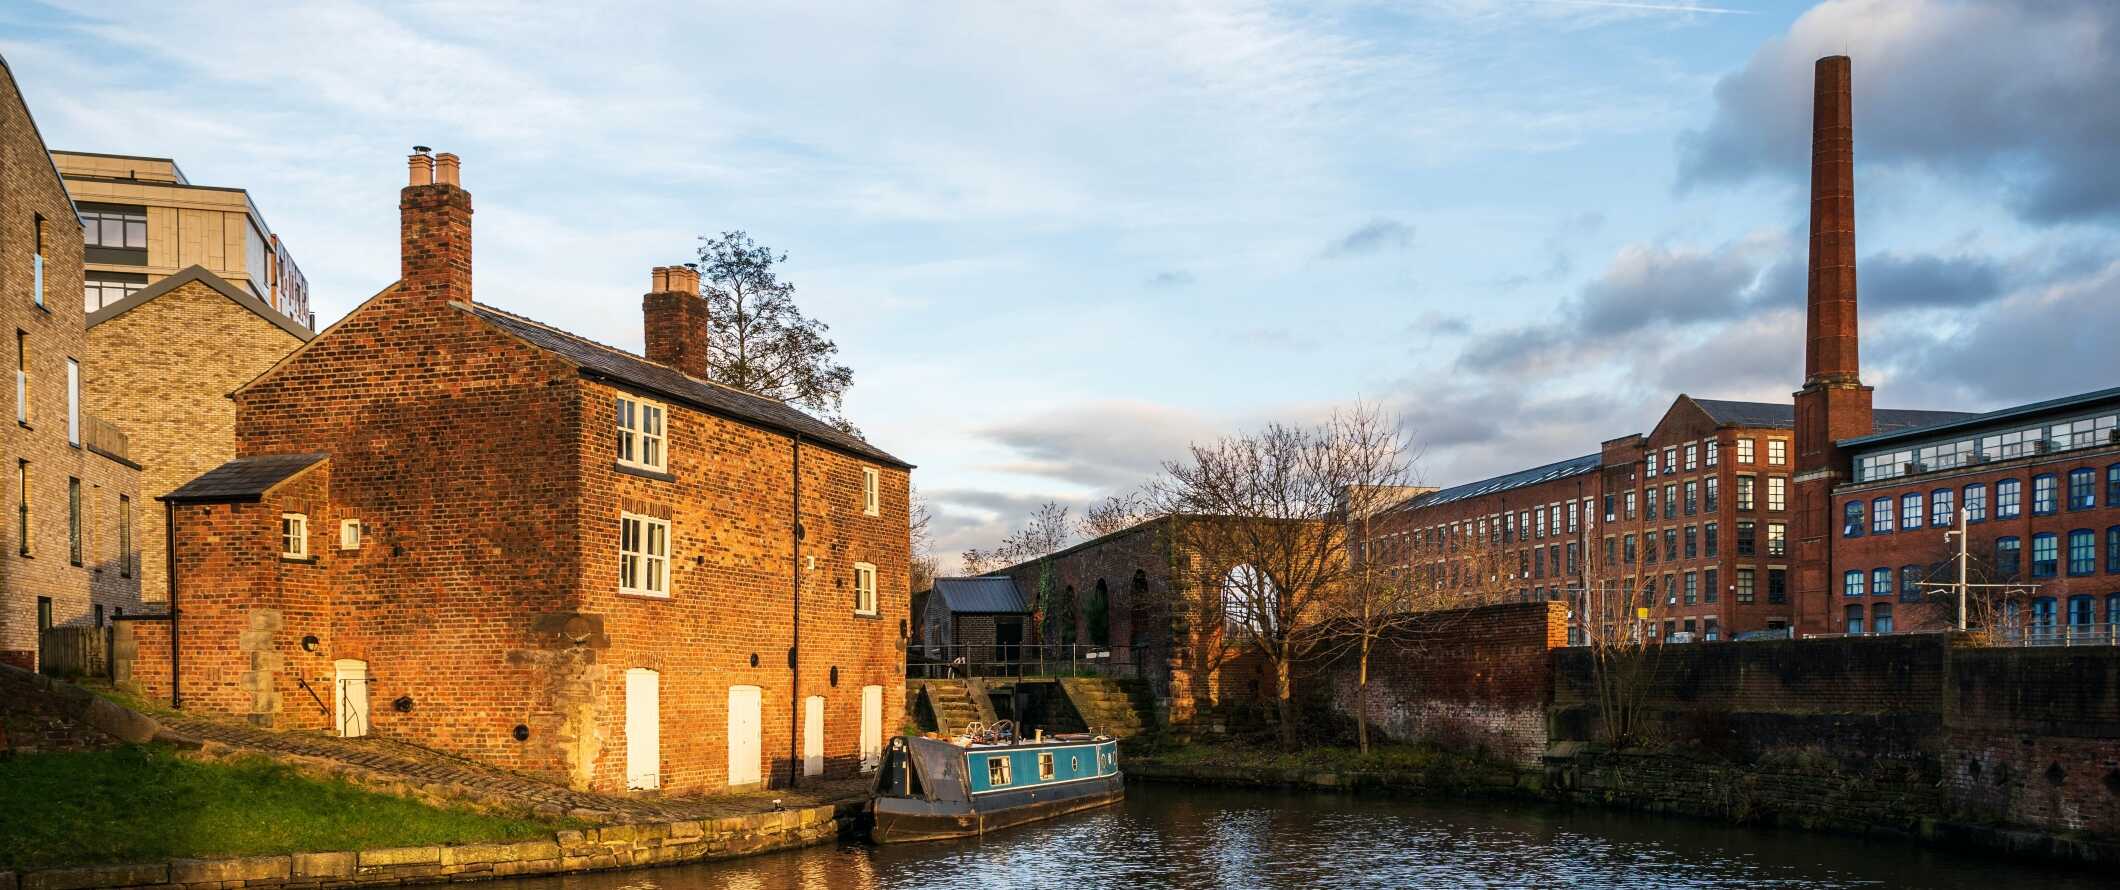 Historic brick buildings and a warehouse along a canal with a small boat in it in Manchester, England